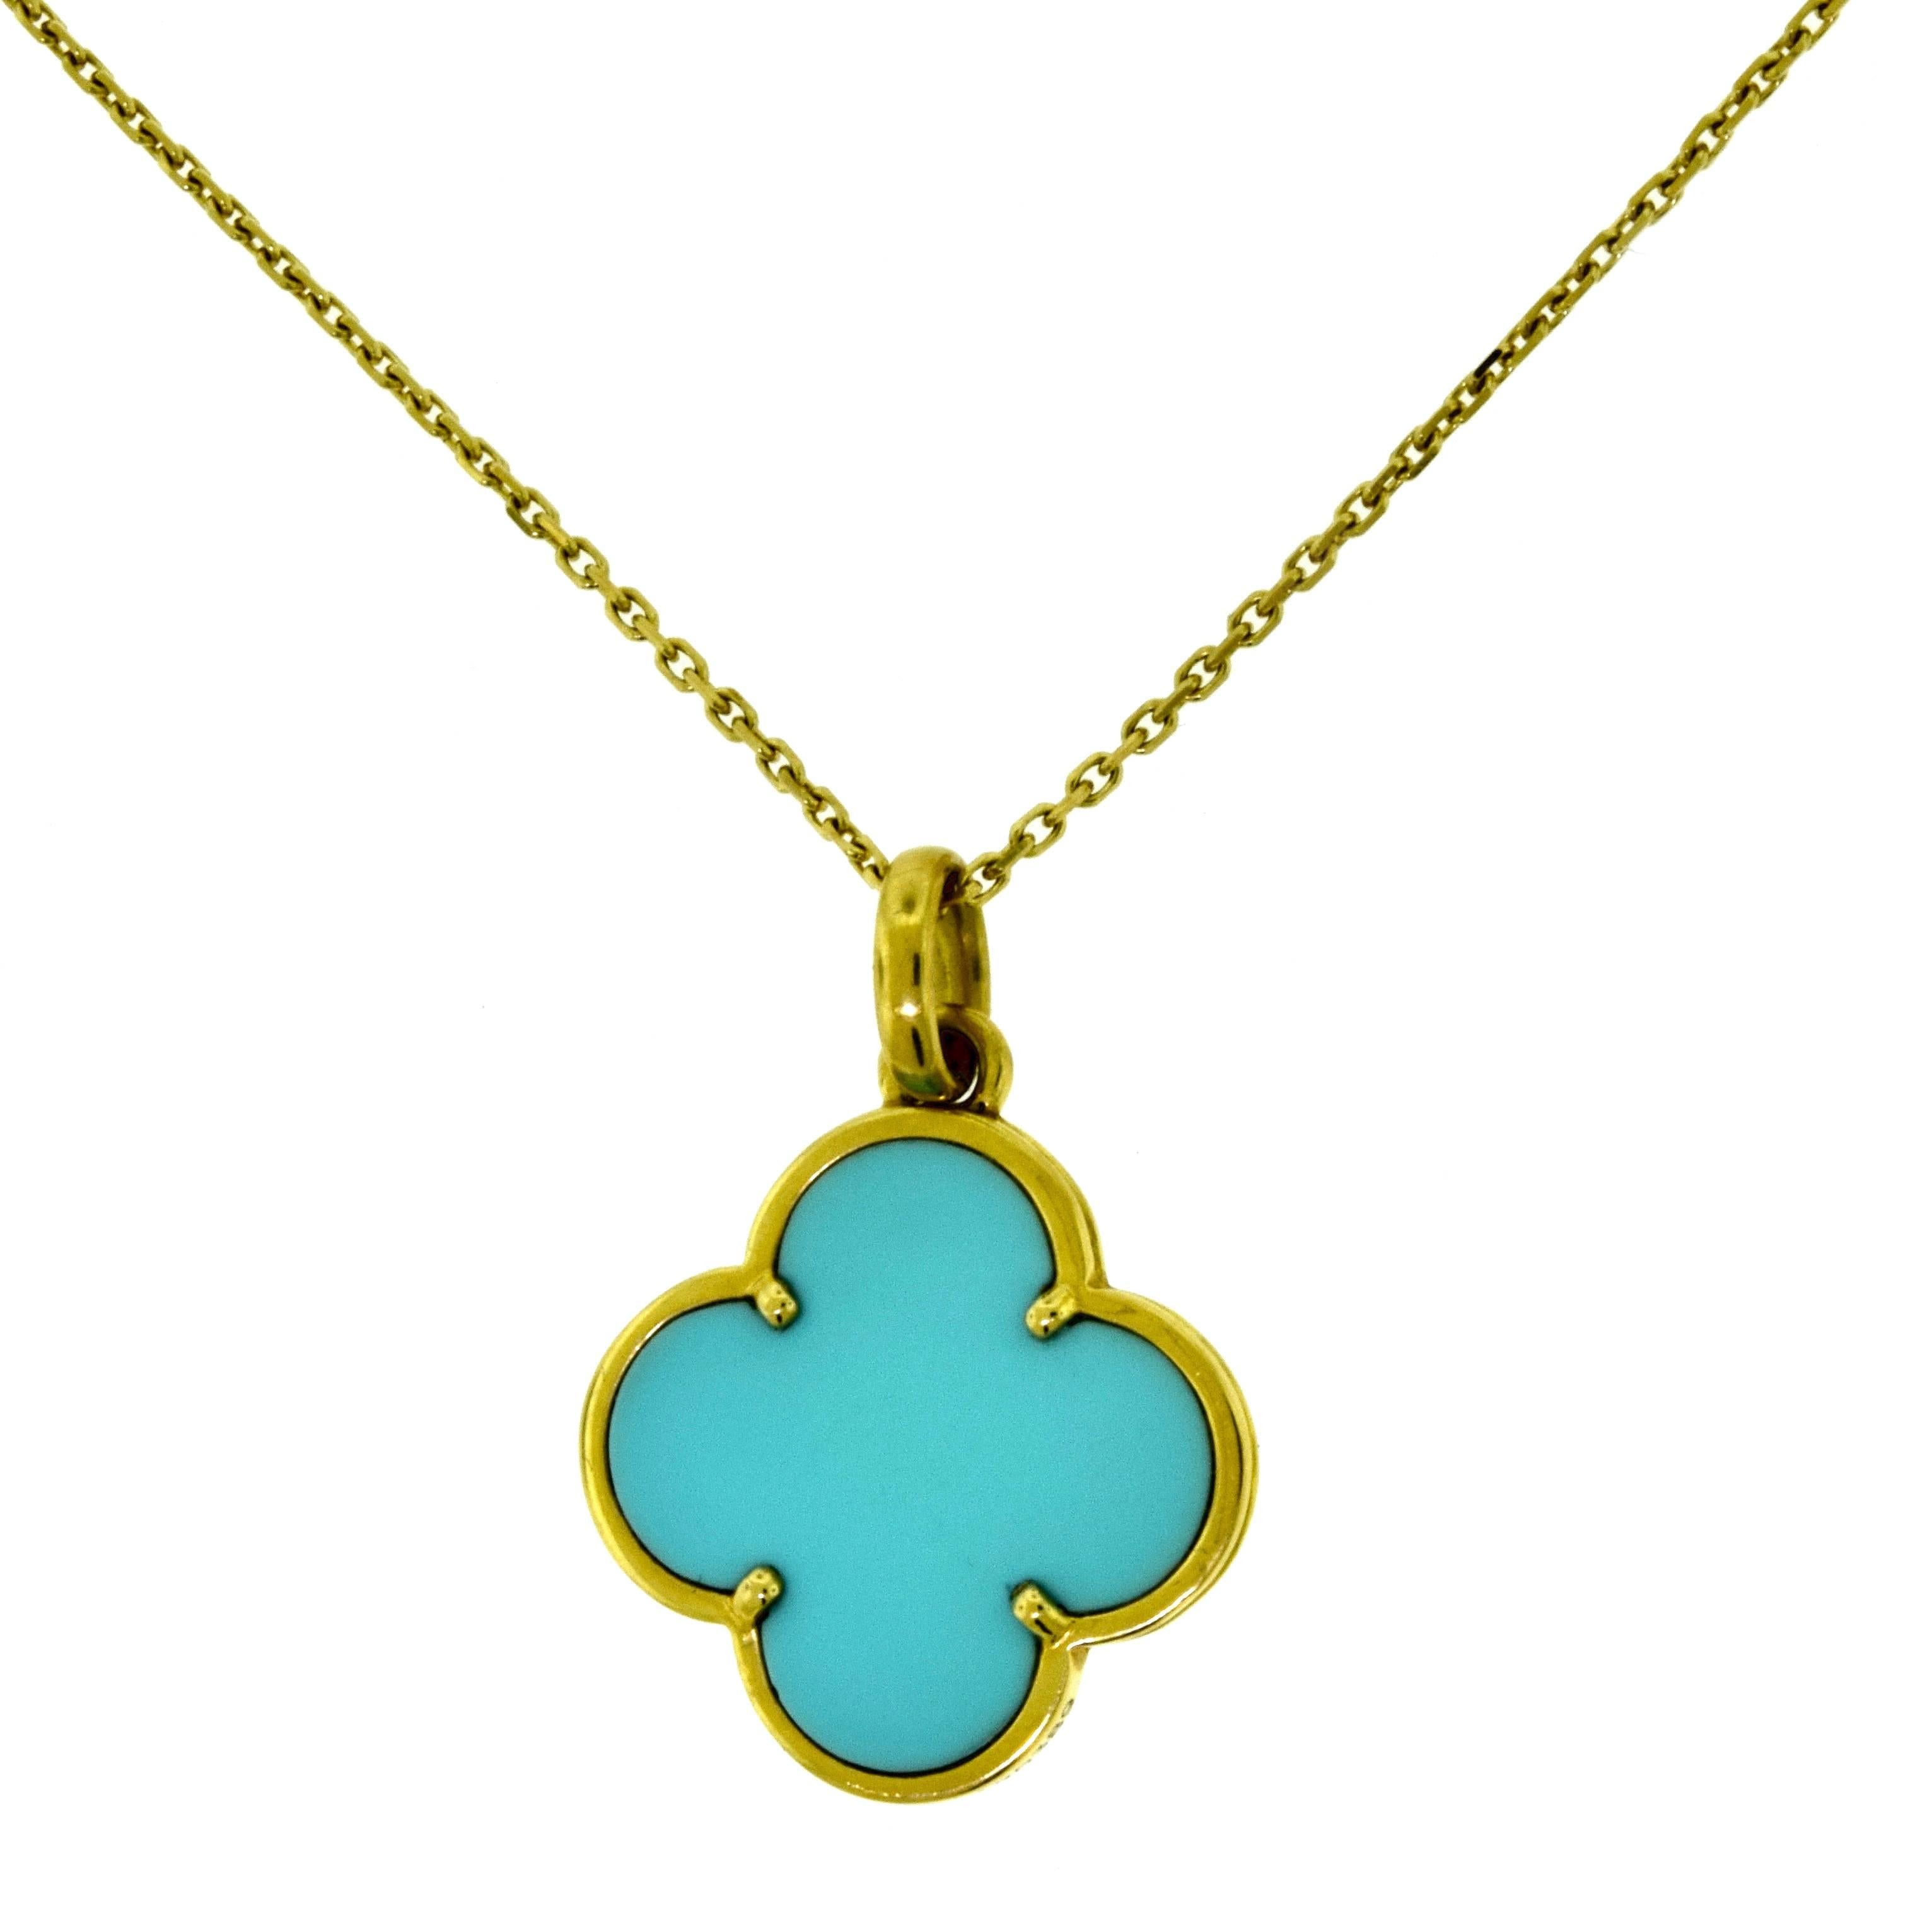 Van Cleef & Arpels Lg. Magic Alhambra Turquoise Pendant in Yellow Gold, Chain For Sale